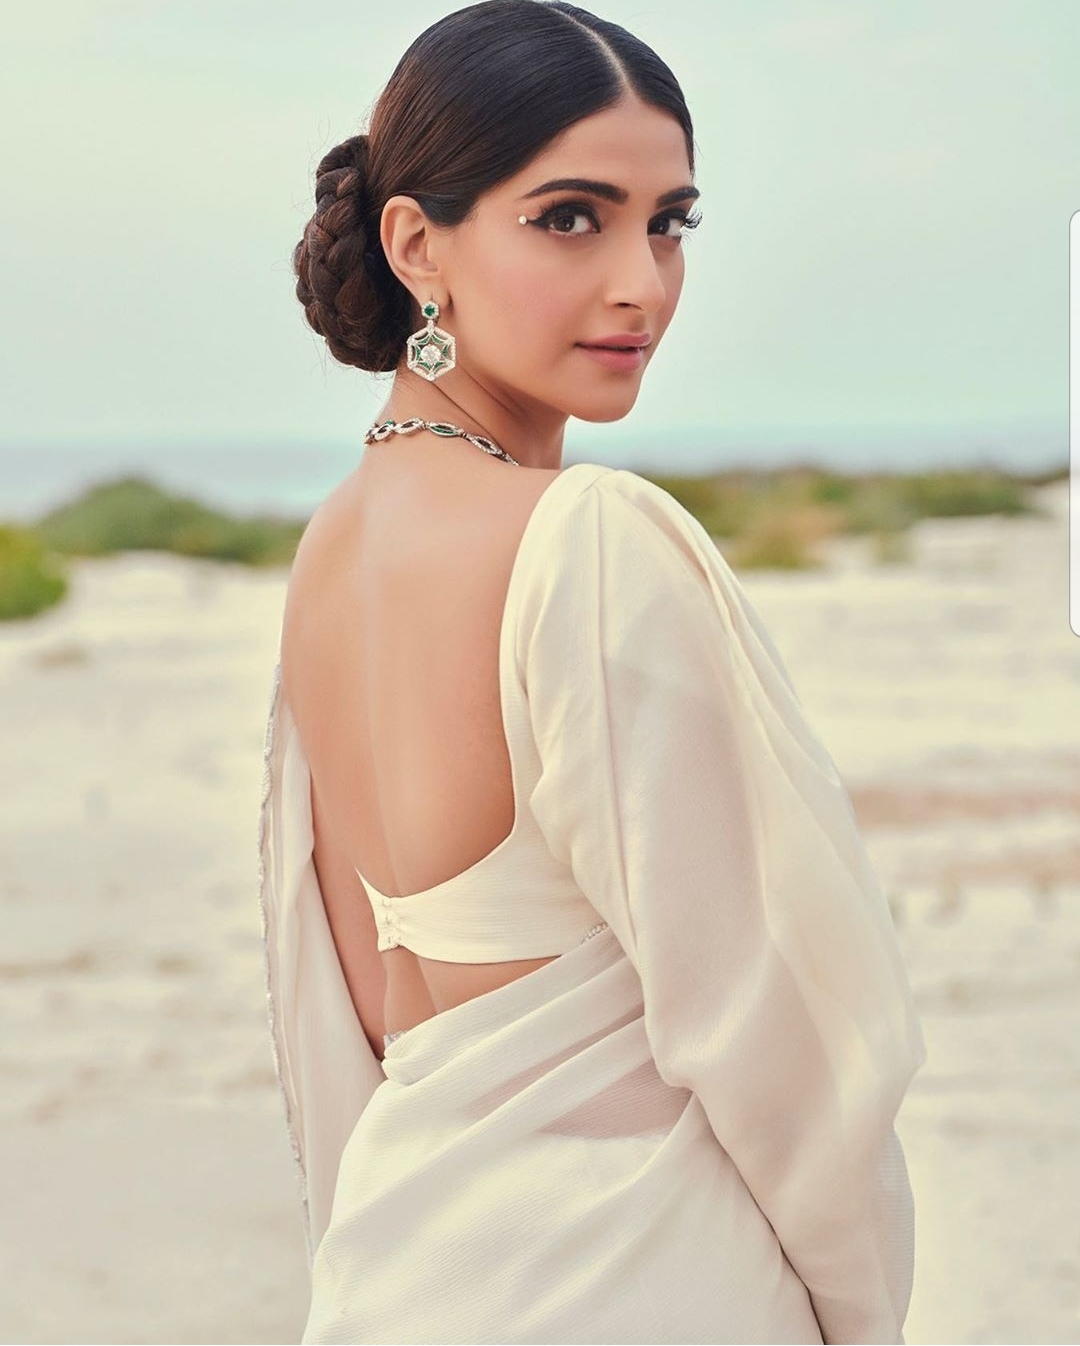 Sonam Kapoor Exudes the Old World Charm in a Classic Pearl Sari - Masala